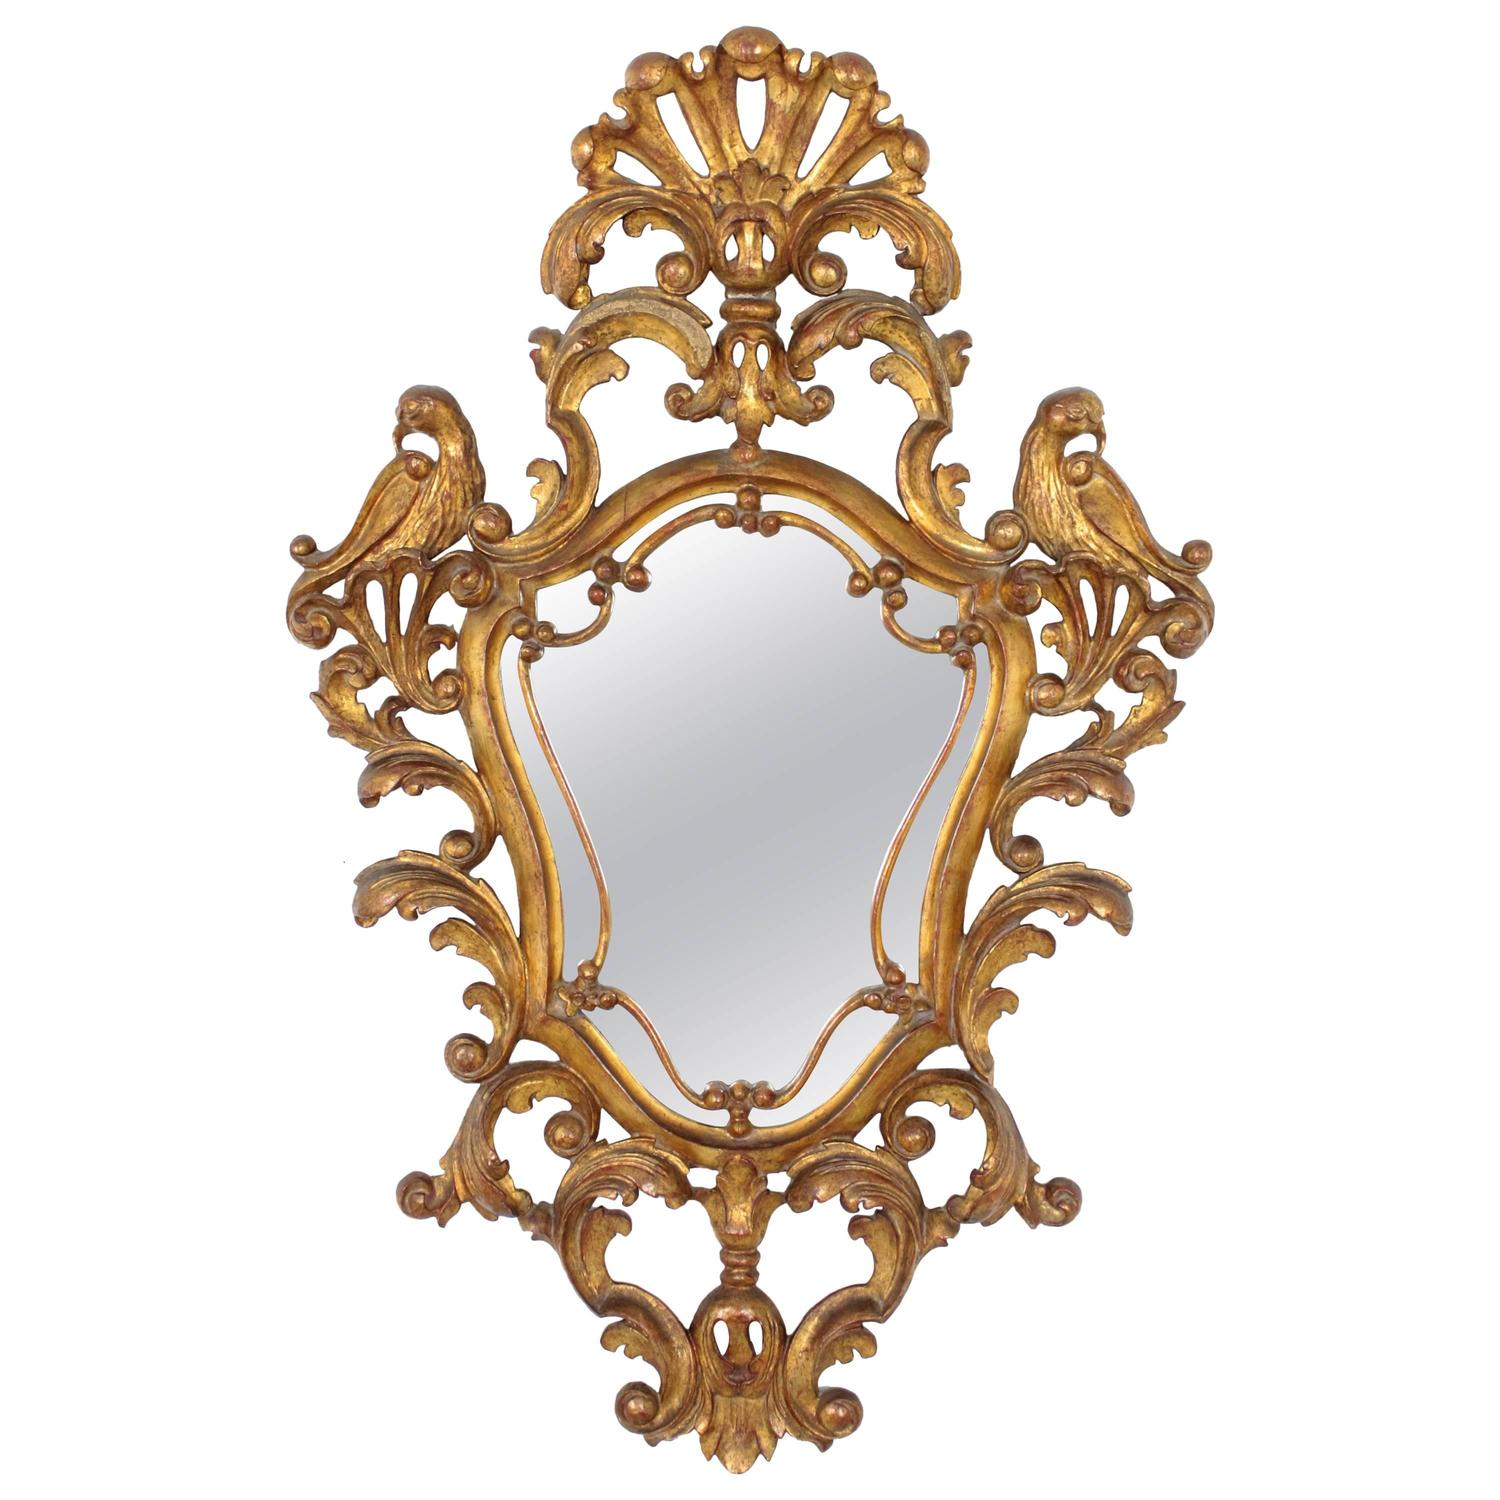 19th Century Spanish Rococo Style Wood Carved Gold Leaf Mirror For Sale at 1stdibs